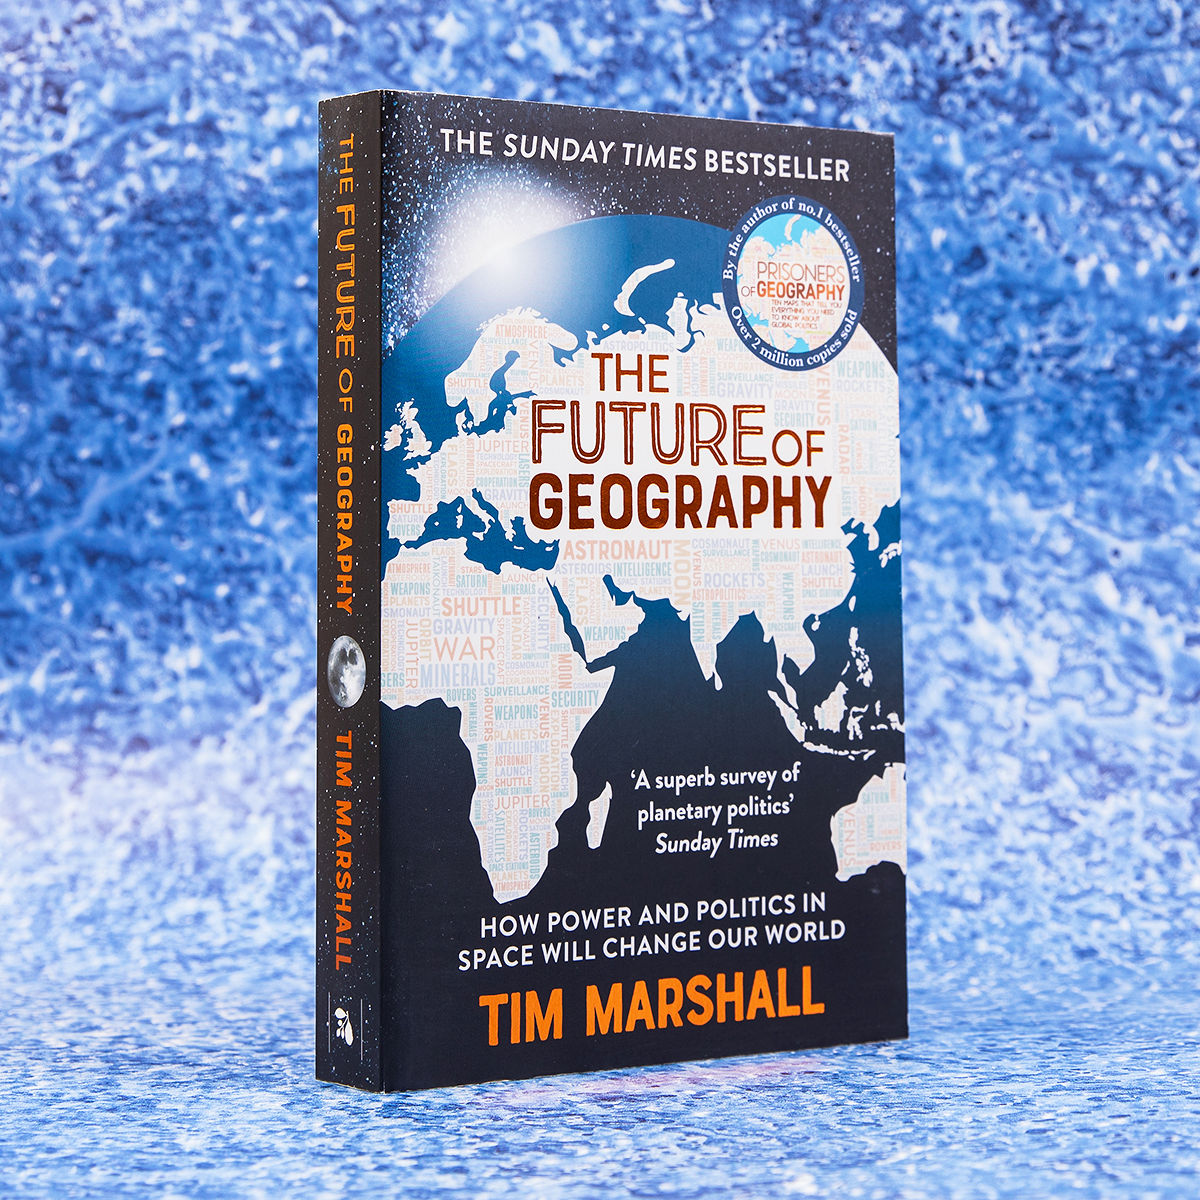 Have you read @Itwitius's #TheFutureOfGeography? The bestselling author of #PrisonersOfGeography & #ThePowerOfGeography turns his attention to the geopolitical space race and what it means for the rest of us down here on Earth: bit.ly/3tiGN41 #geopolitics #astropolitics